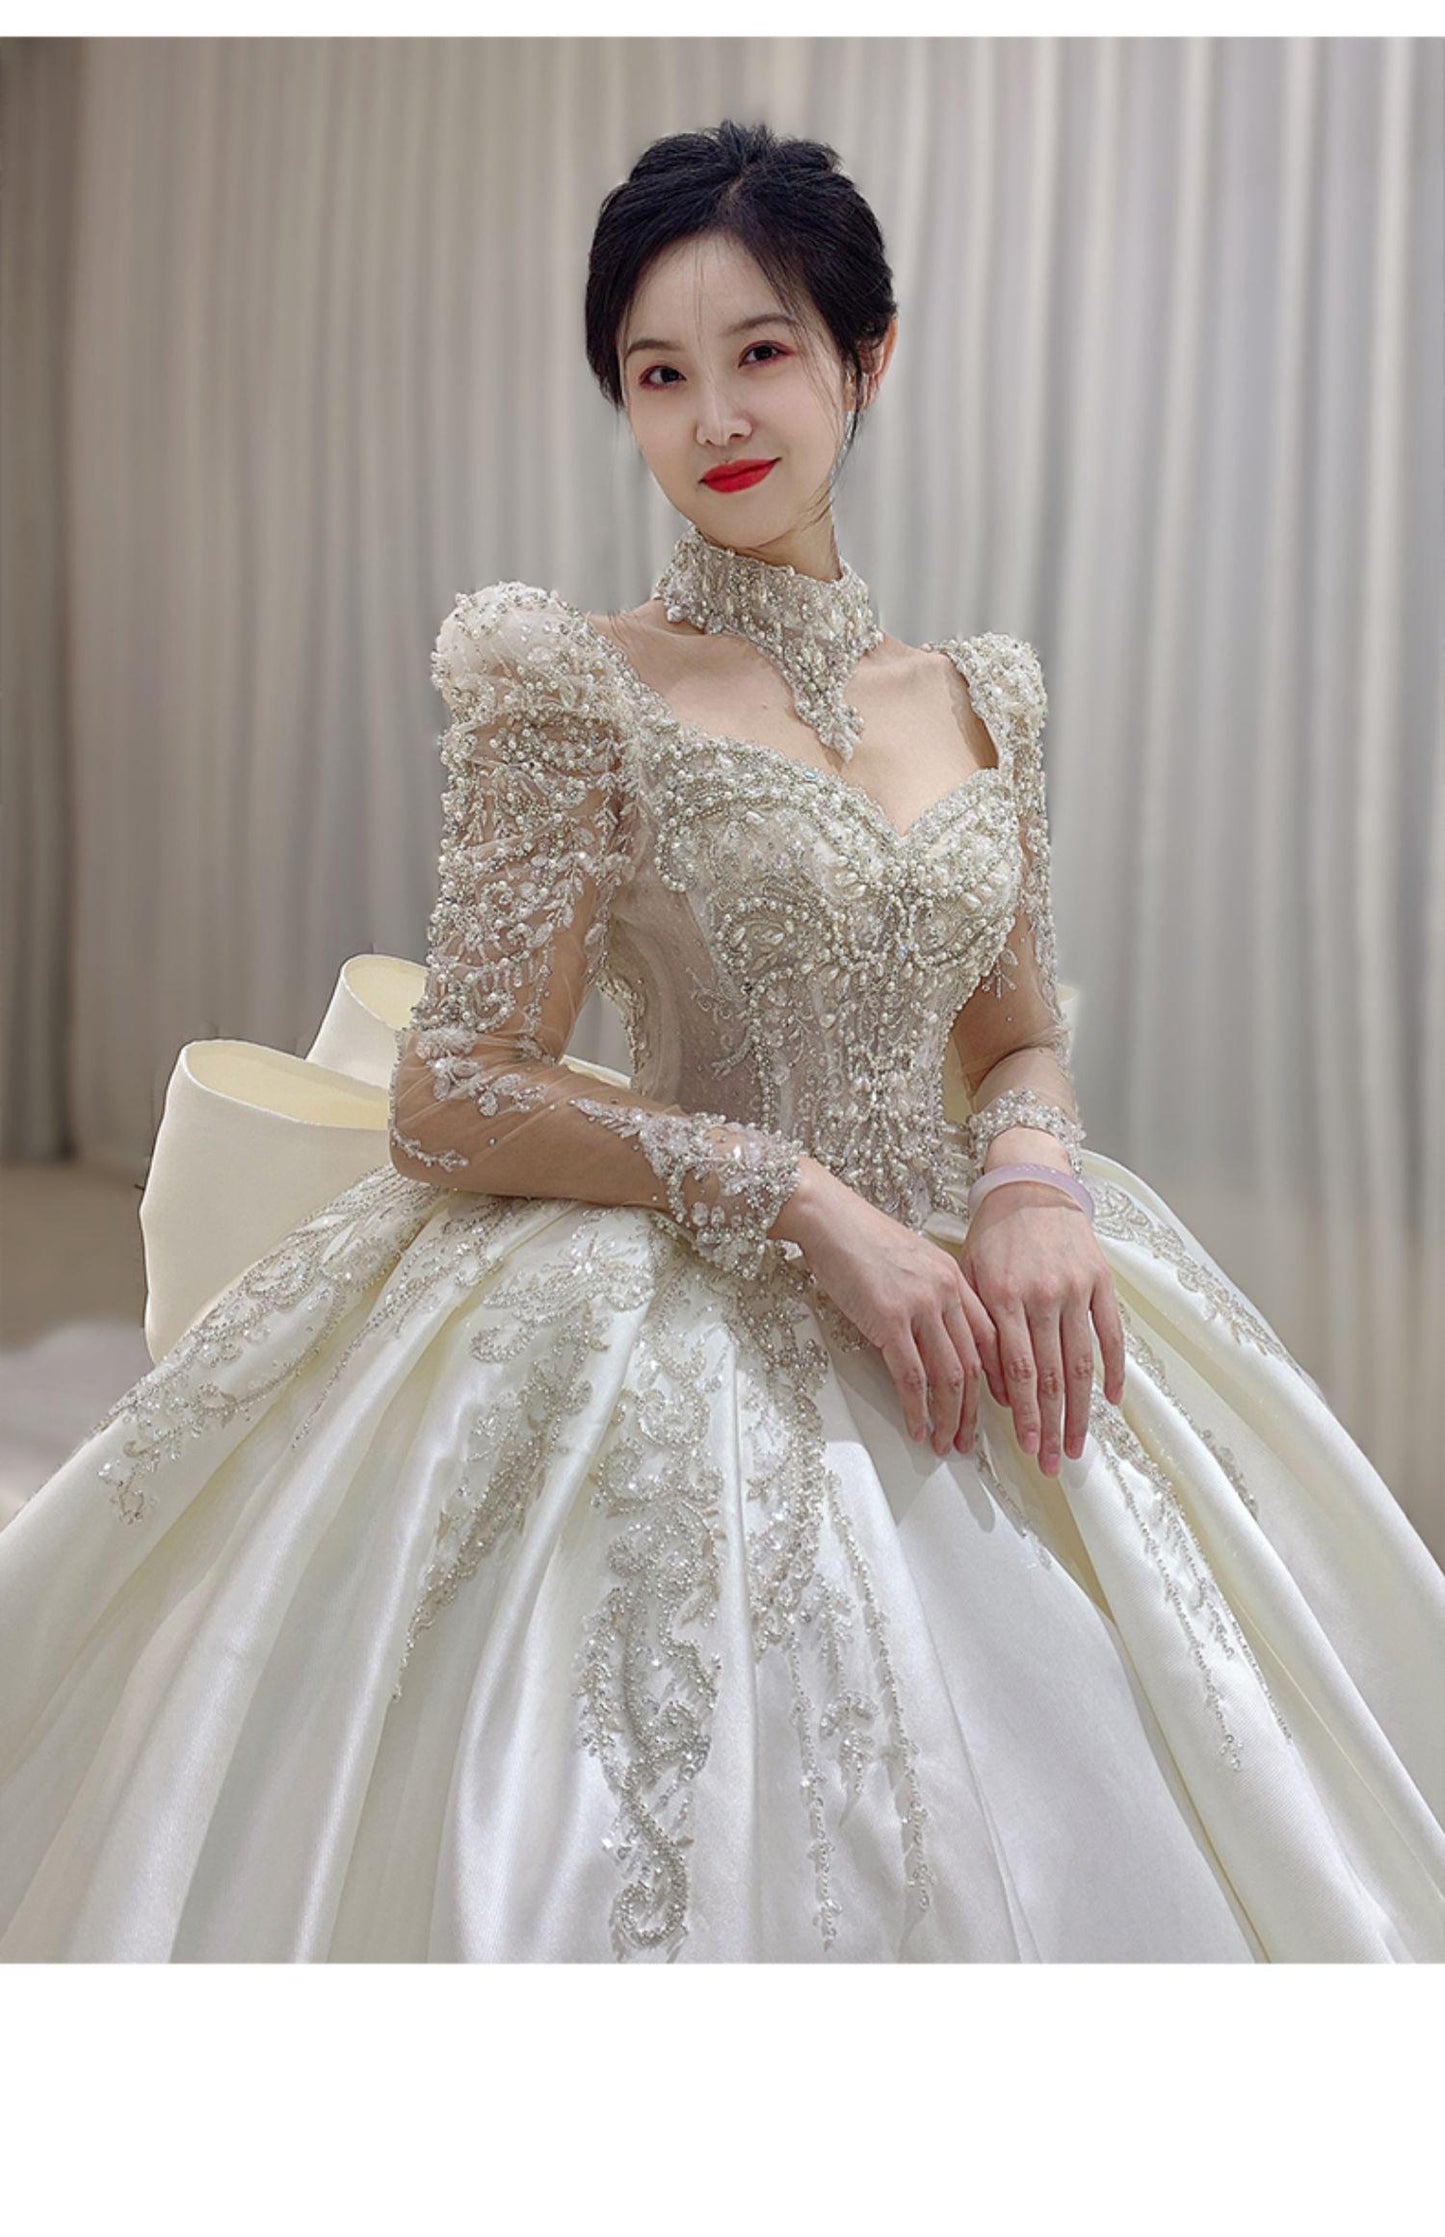 Long Sleeve Wedding Trailing Satin Lace Embroidery Bridal Dresses